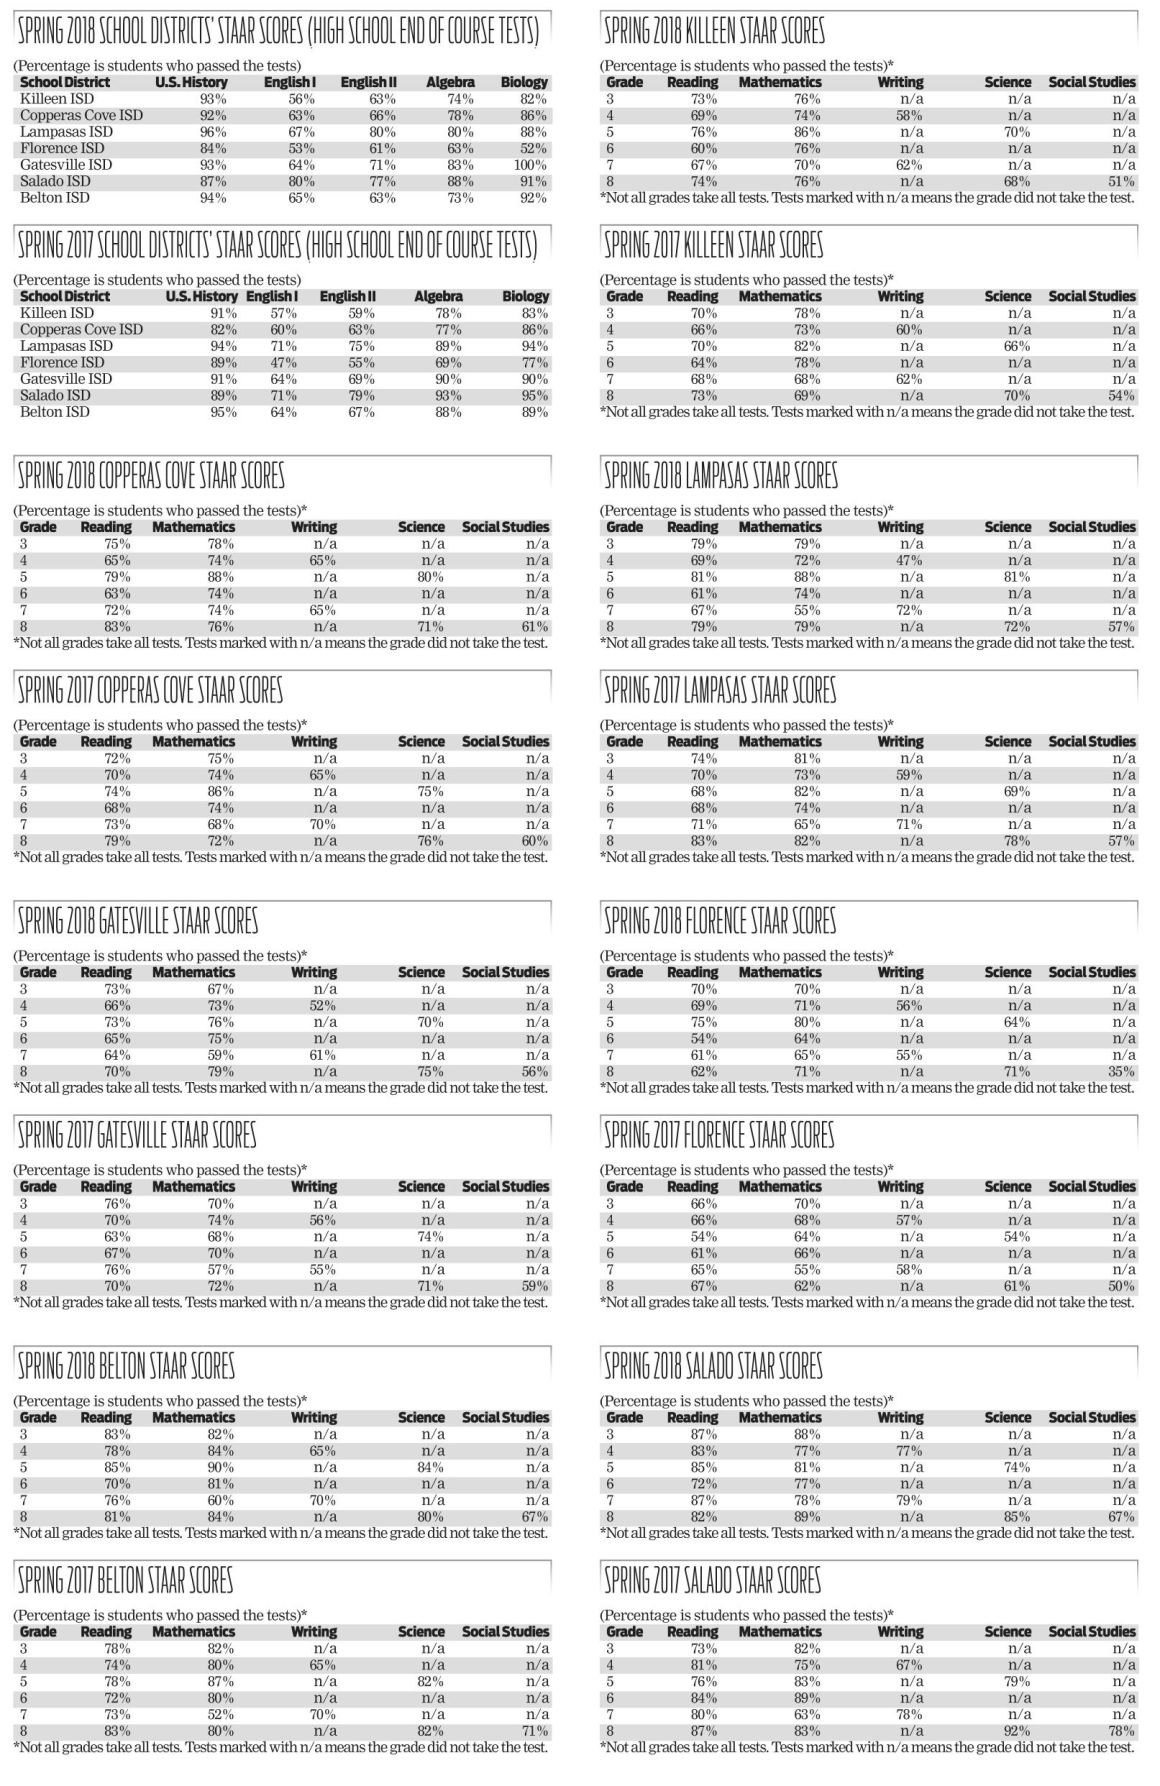 staar-scores-comparison-chart-local-school-districts-kdhnews